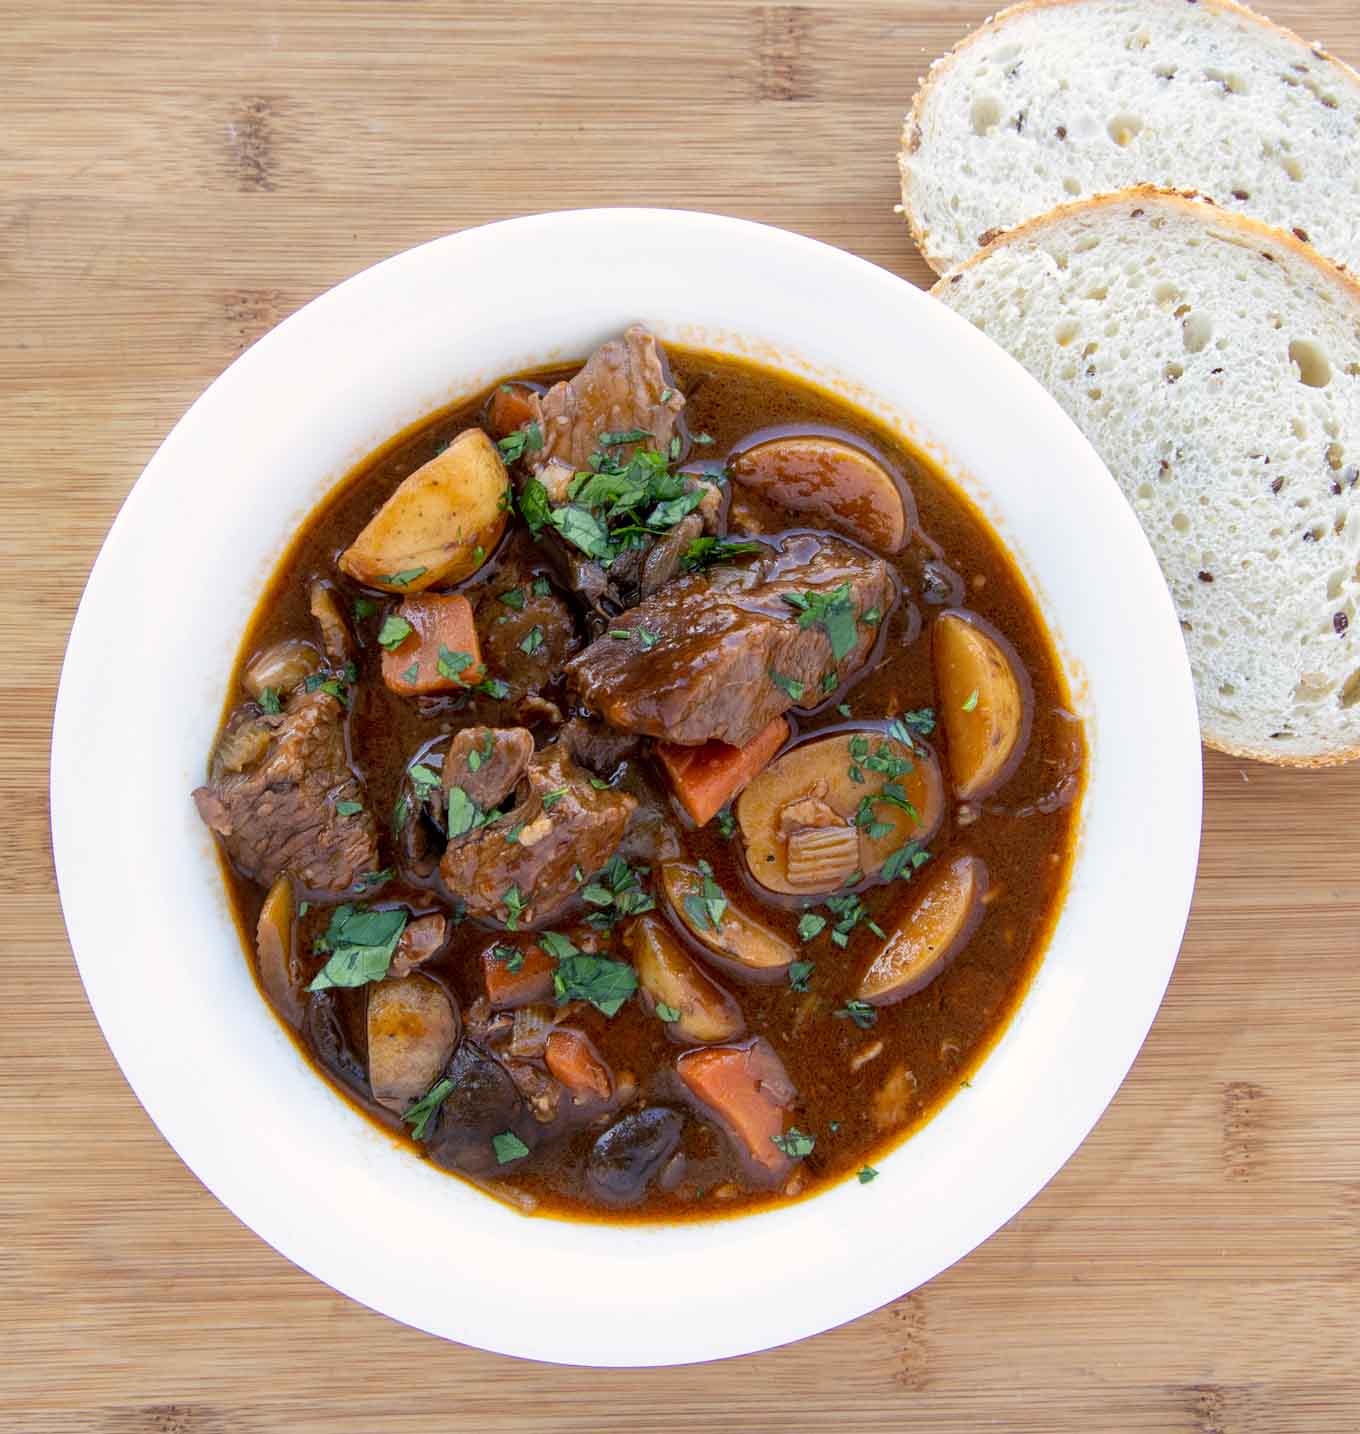 Authentic Guinness Beef Stew Recipe